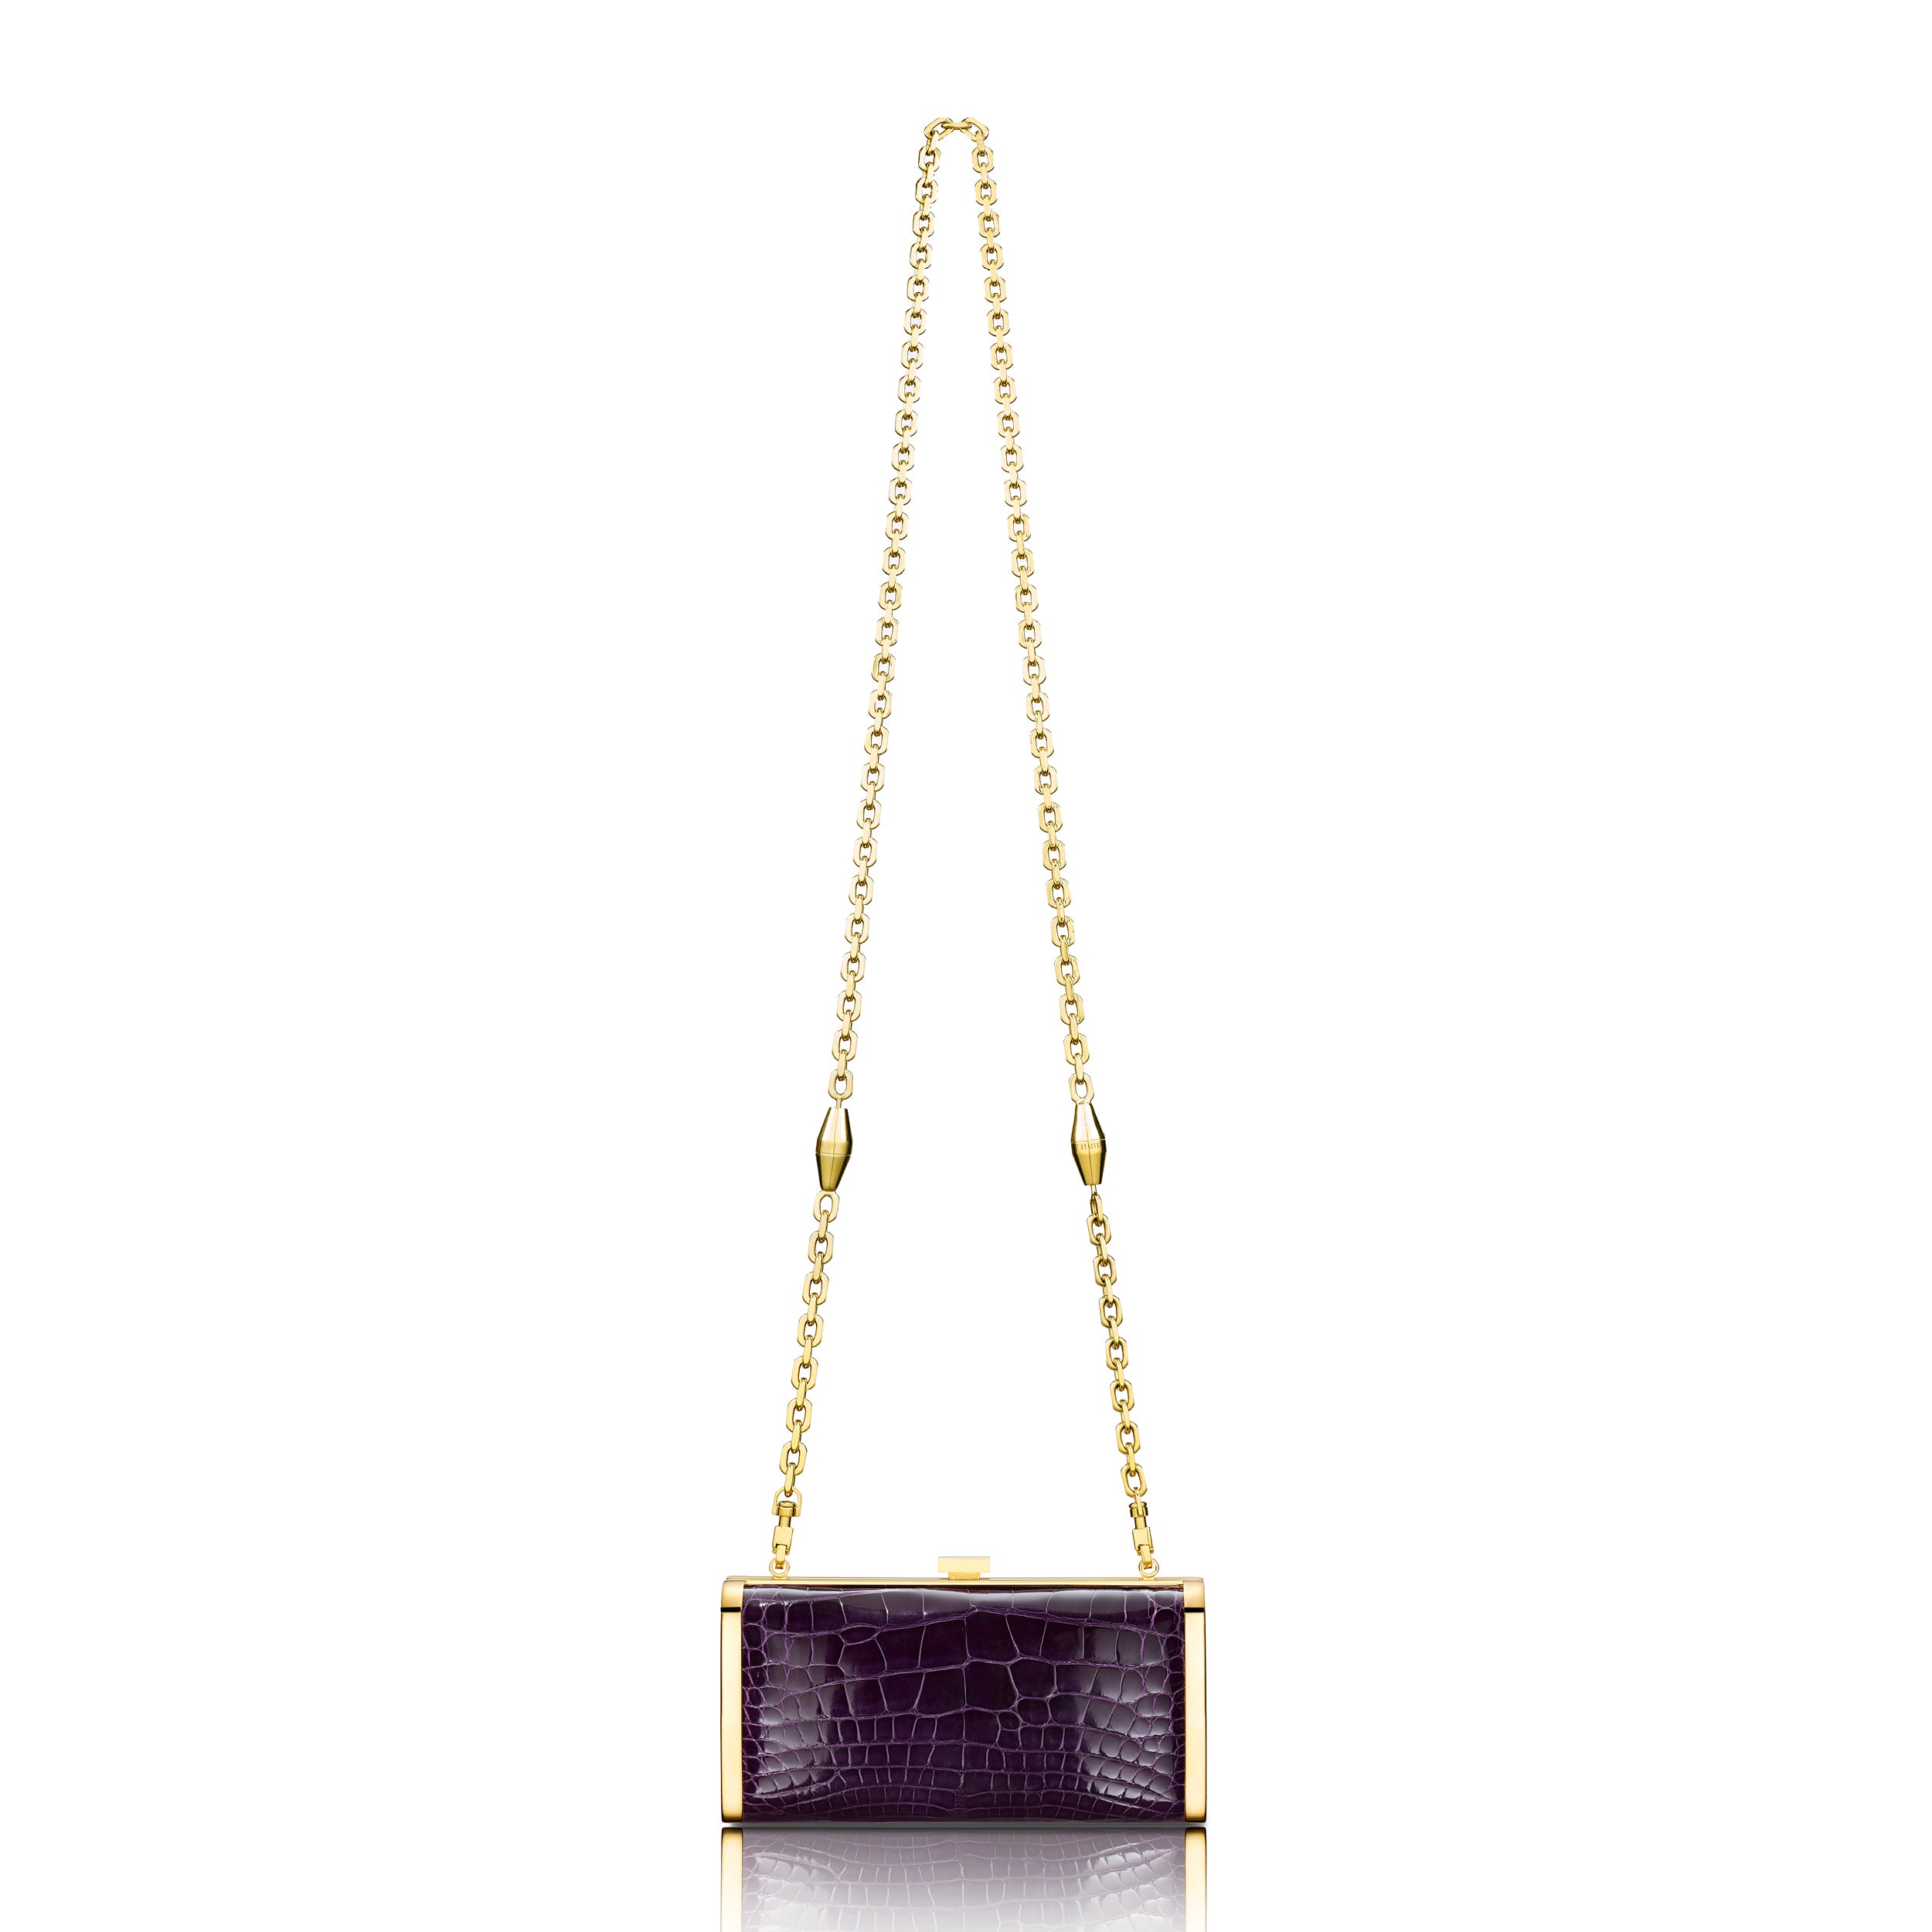 STALVEY Square Clutch in Royal Purple Alligator with 24kt Gold Hardware Back View with Chain